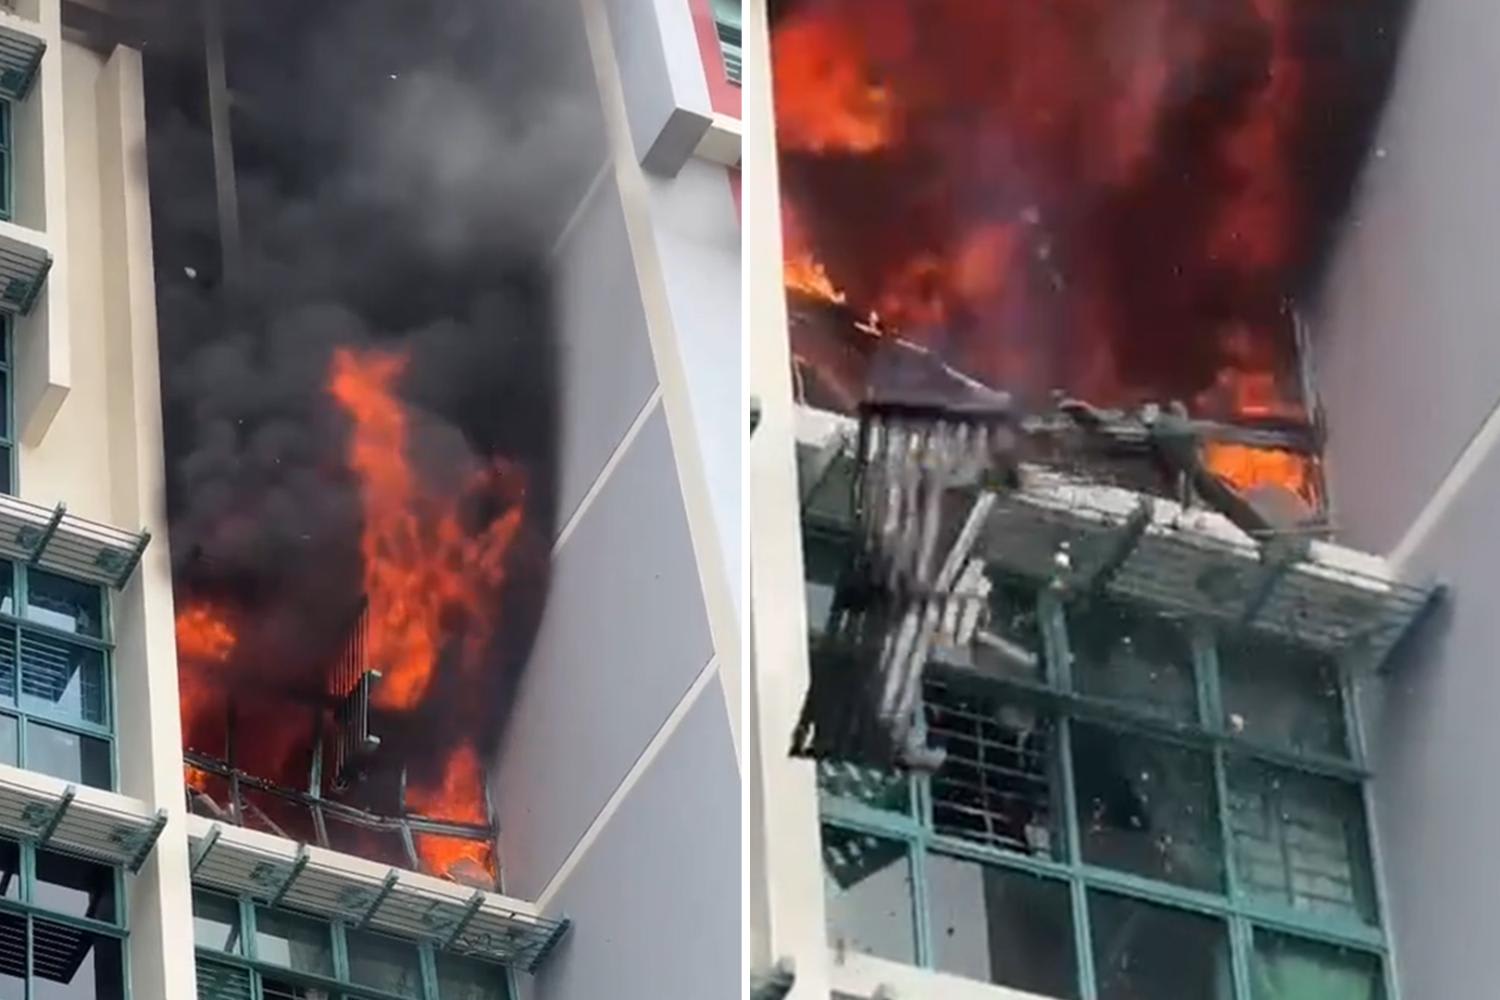 About 50 people evacuated after fire at HDB flat in Woodlands